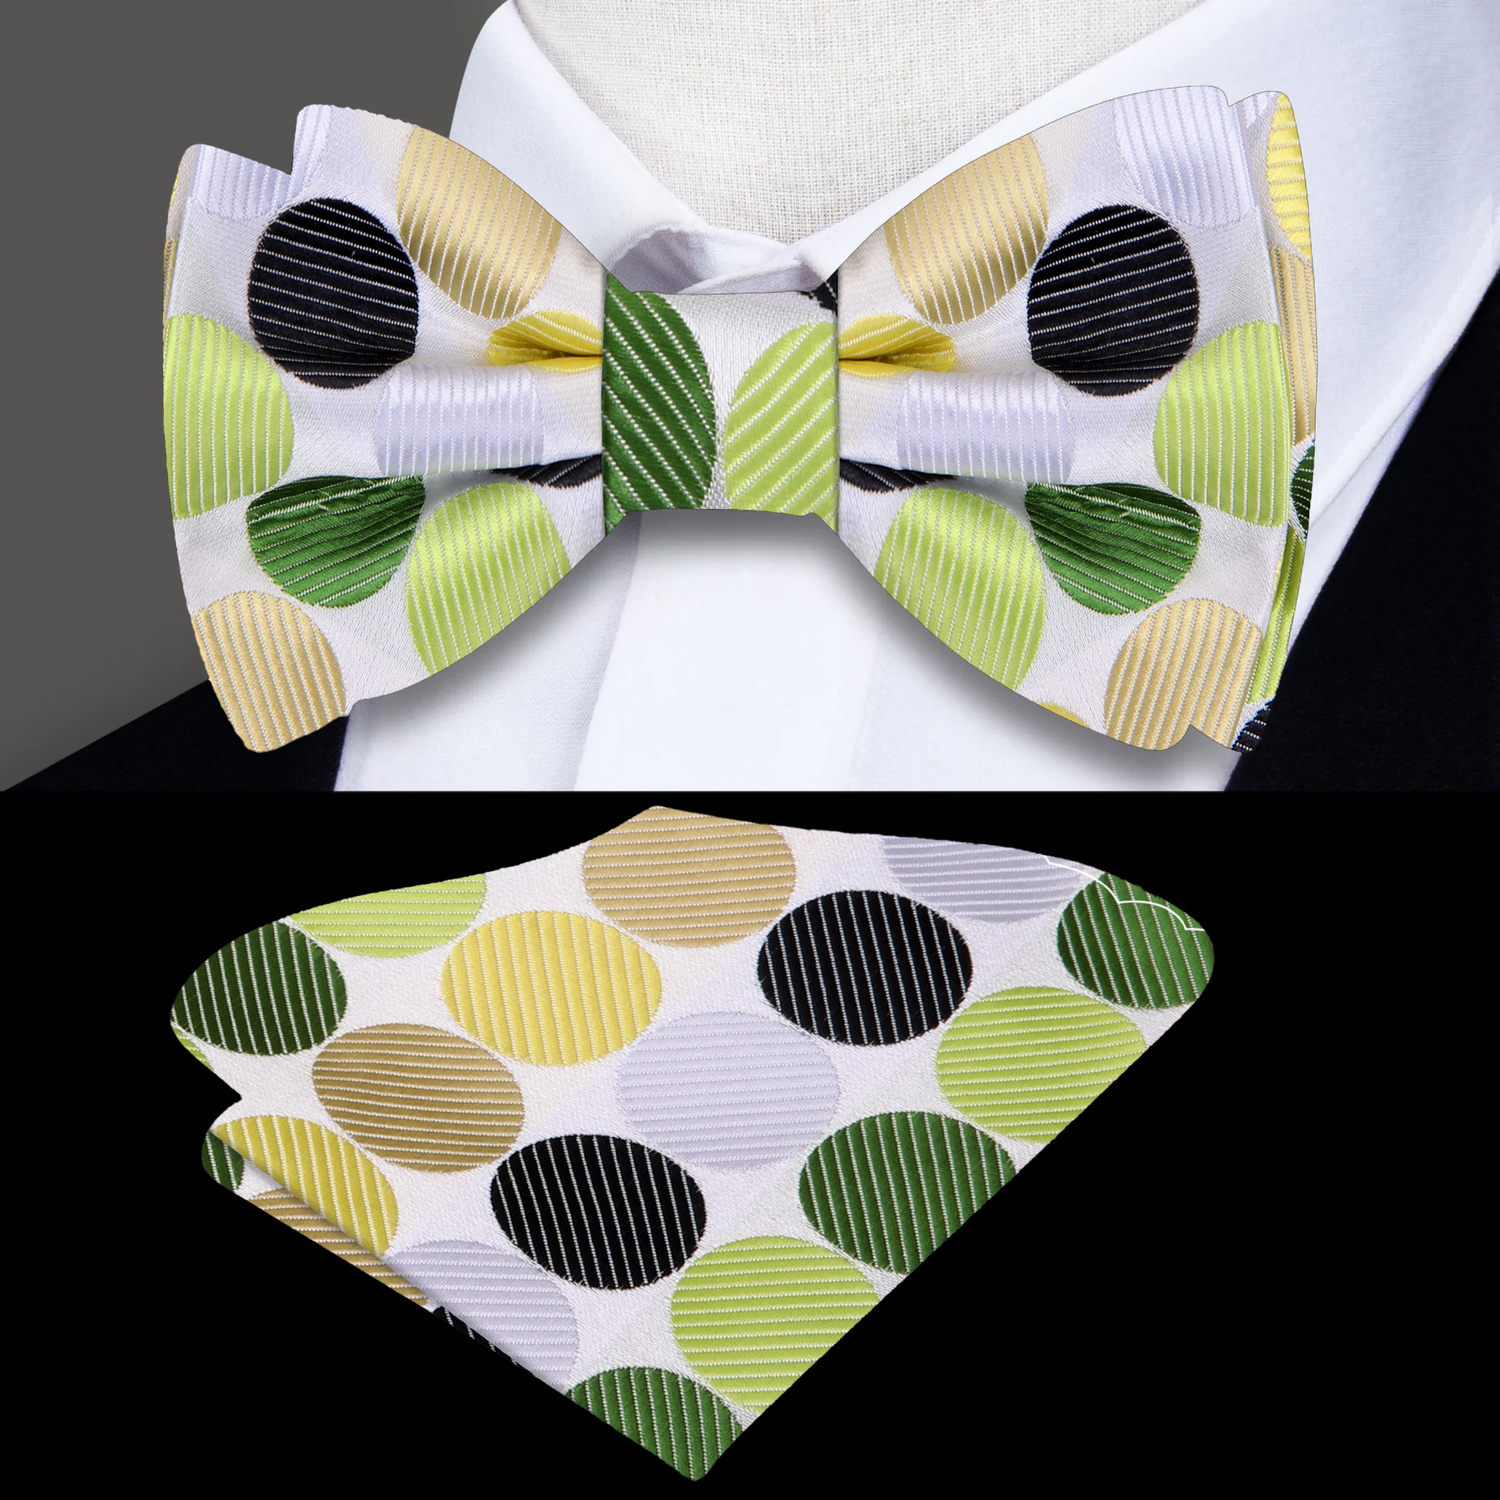 Main View: White, Green, Yellow Polka Dot Bow Tie and Pocket Square